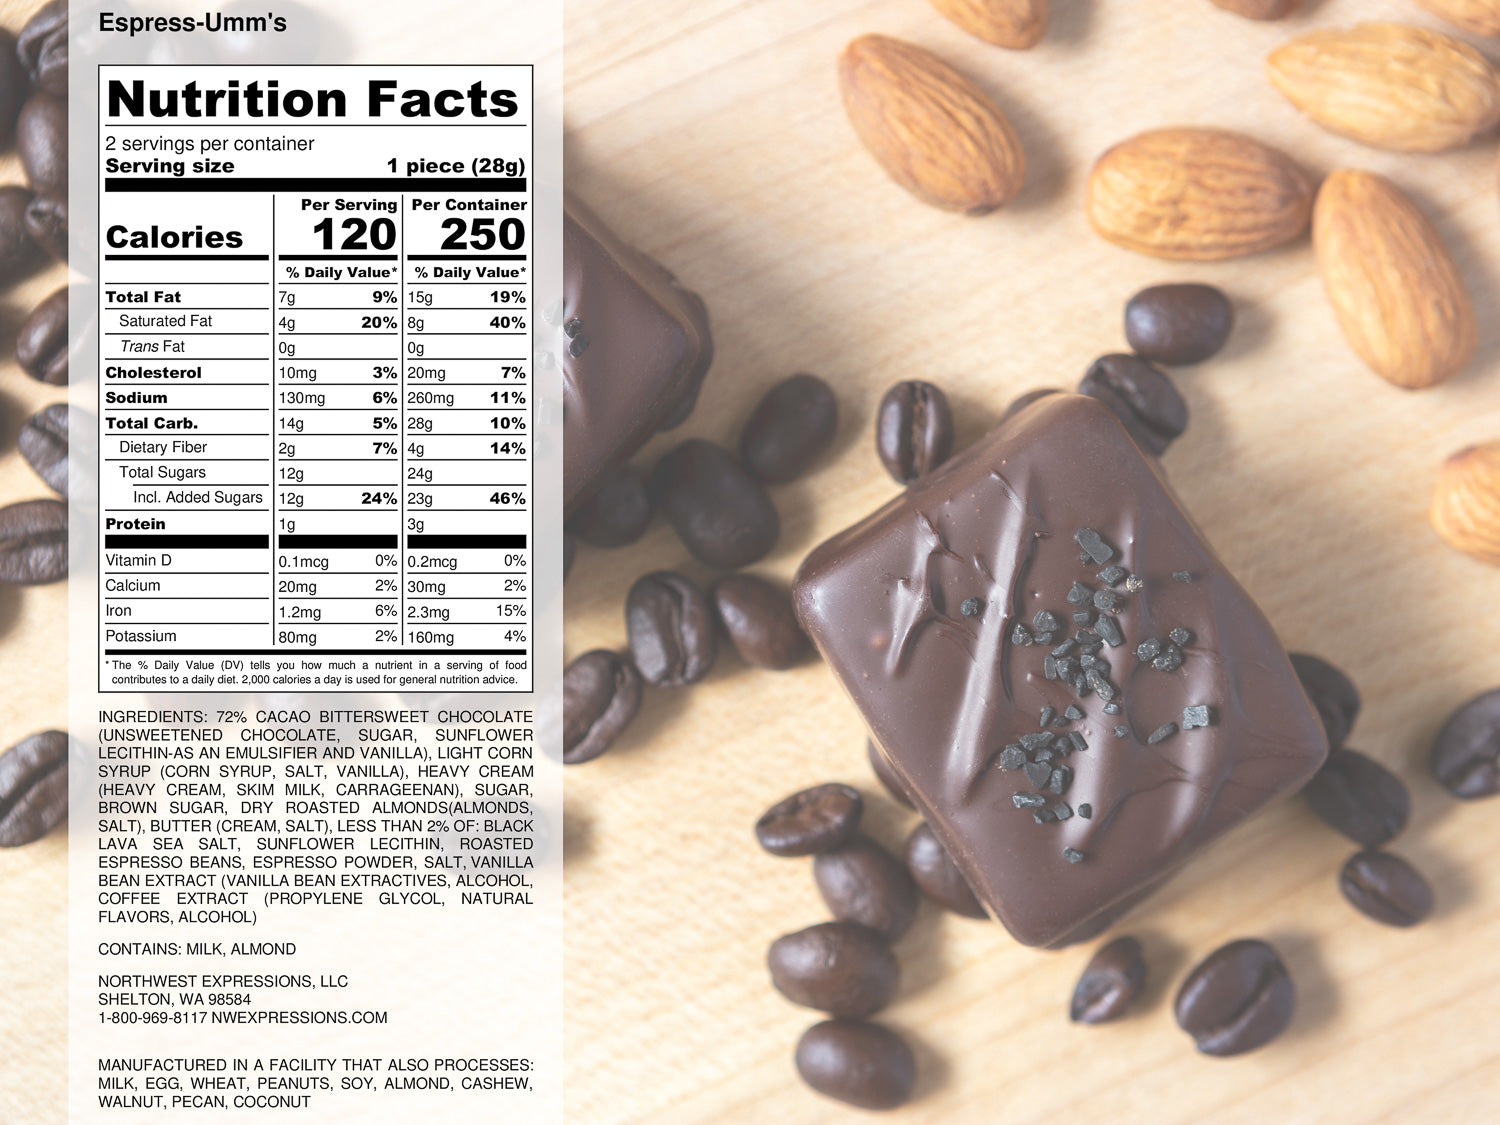 the nutritional facts panel for espress-uum caramels